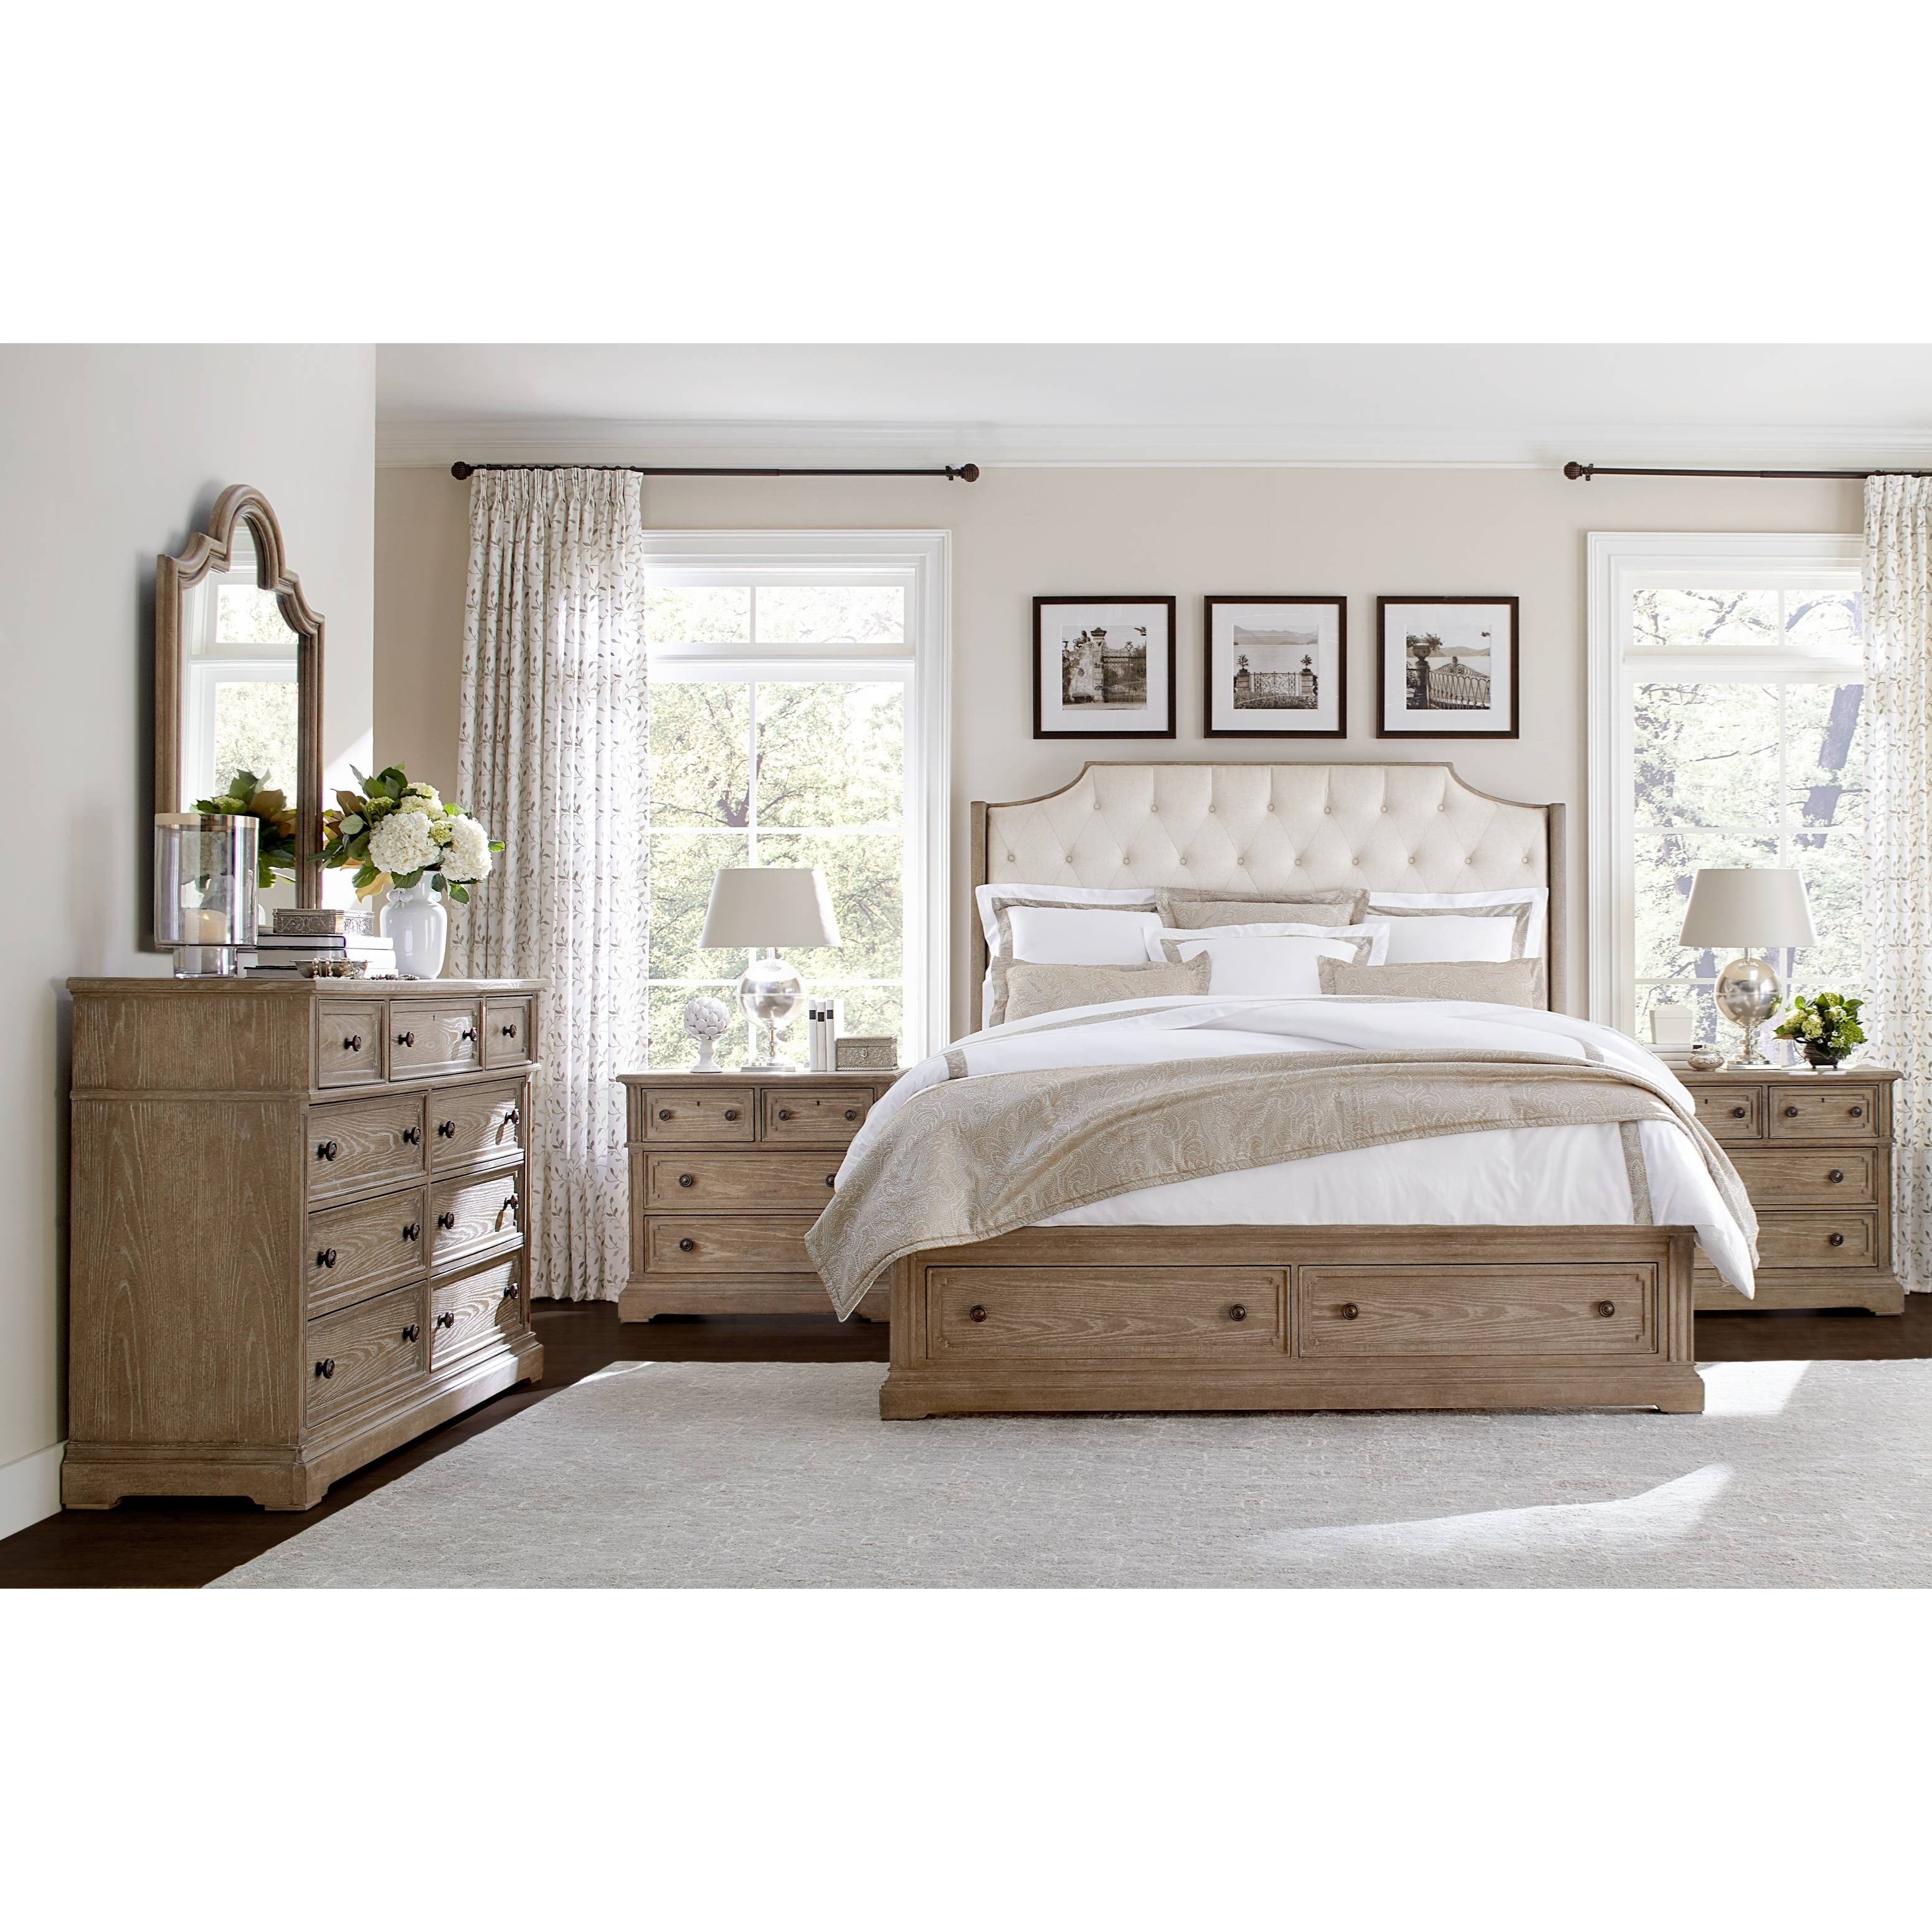 Wethersfield Estate King Bedroom Group Stanley Furniture At Dunk Bright Furniture intended for sizing 3102 X 3102